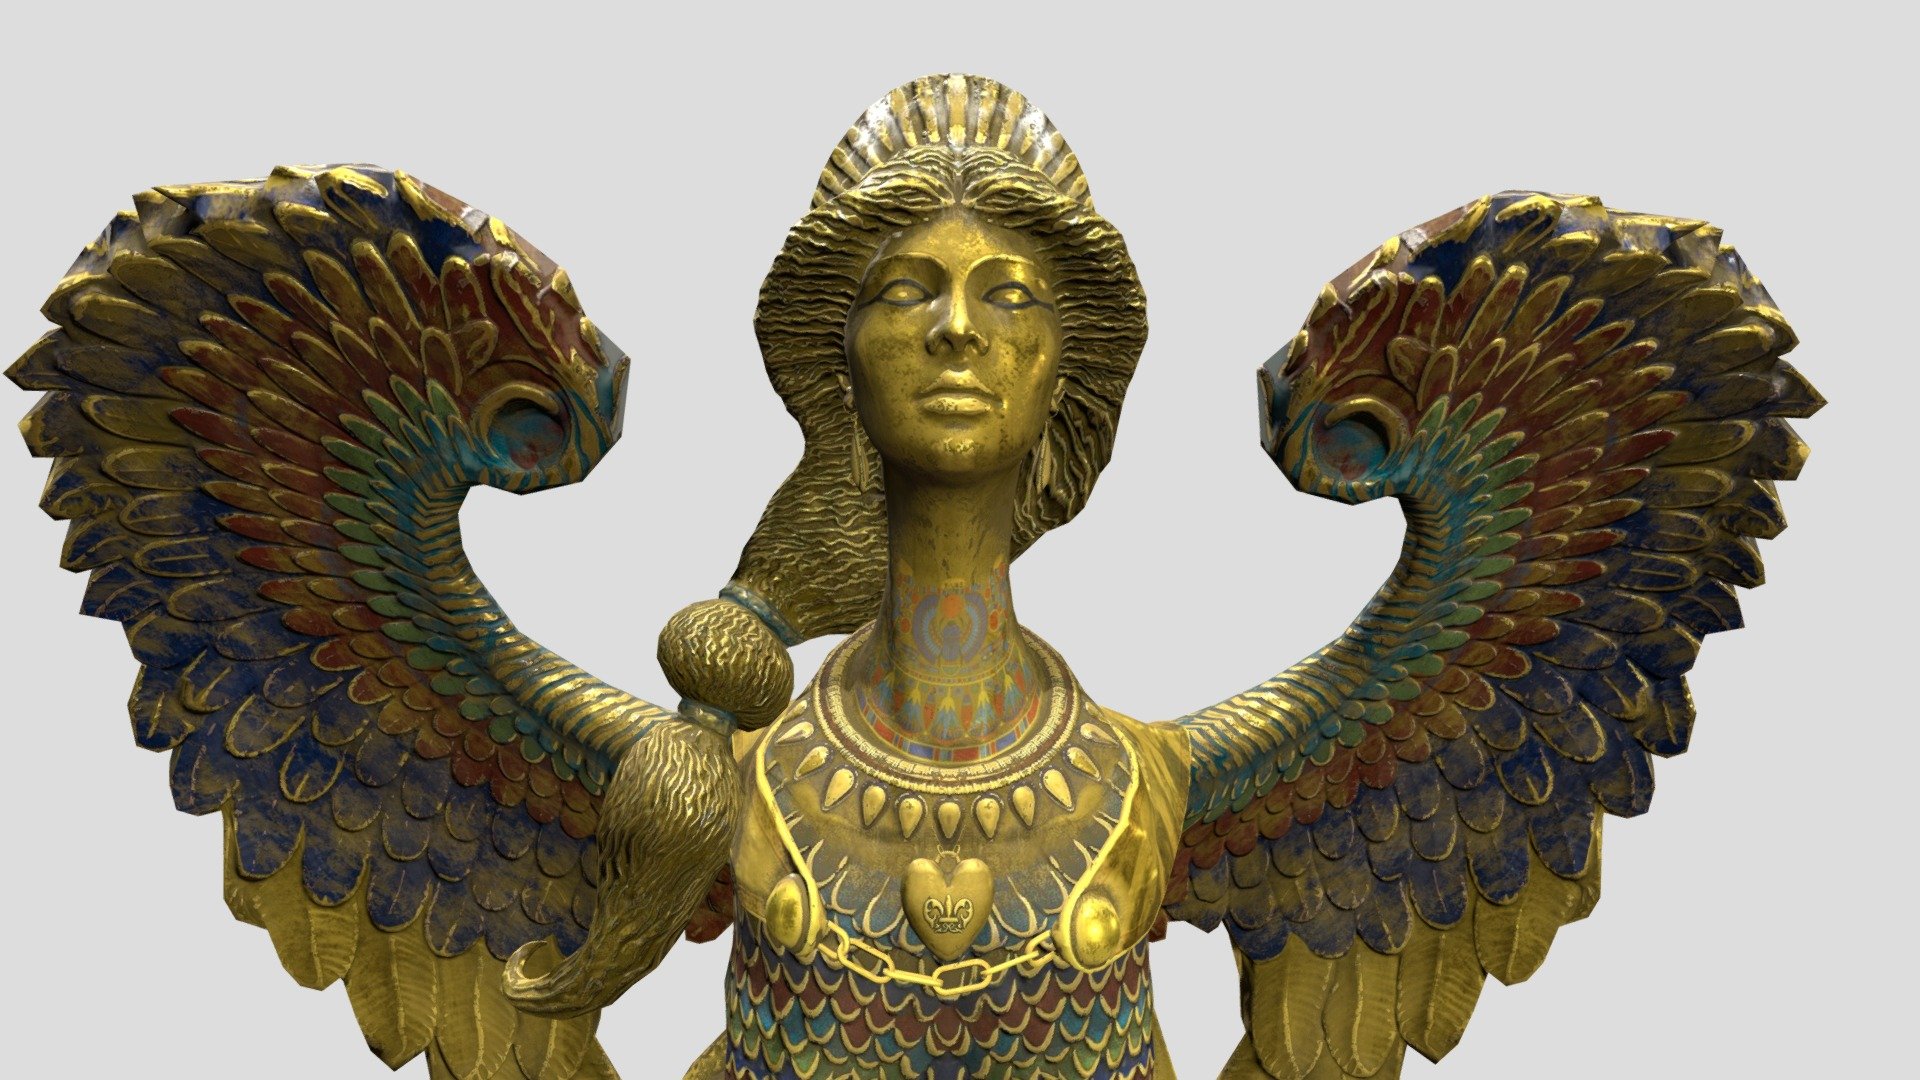 Sphinxes qveen model. This Game-Ready model contains all the textures necessary for your project. Such as Deffuse map, Normal map, AO map, Roughness map, Hight map and Metallic map. The model consists of three parts, namely: Stone Plinth, Royal Robe and Sphinxes Qveen. For each part, a set of textures with a resolution of 2048x2048

This statue of the queen of the sphinxes is located in an inhabitate city, a desert city. The dry climate of the desert ages paint and metal very much, but residents of the city constantly monitor the condition of the statue of their queen.

You can also view my portfolio at the link https://www.artstation.com/alexeybychkov - Sphinx, Inhabitate Desert City - 3D model by Alex Bychkov (@alexbychkov1996) 3d model